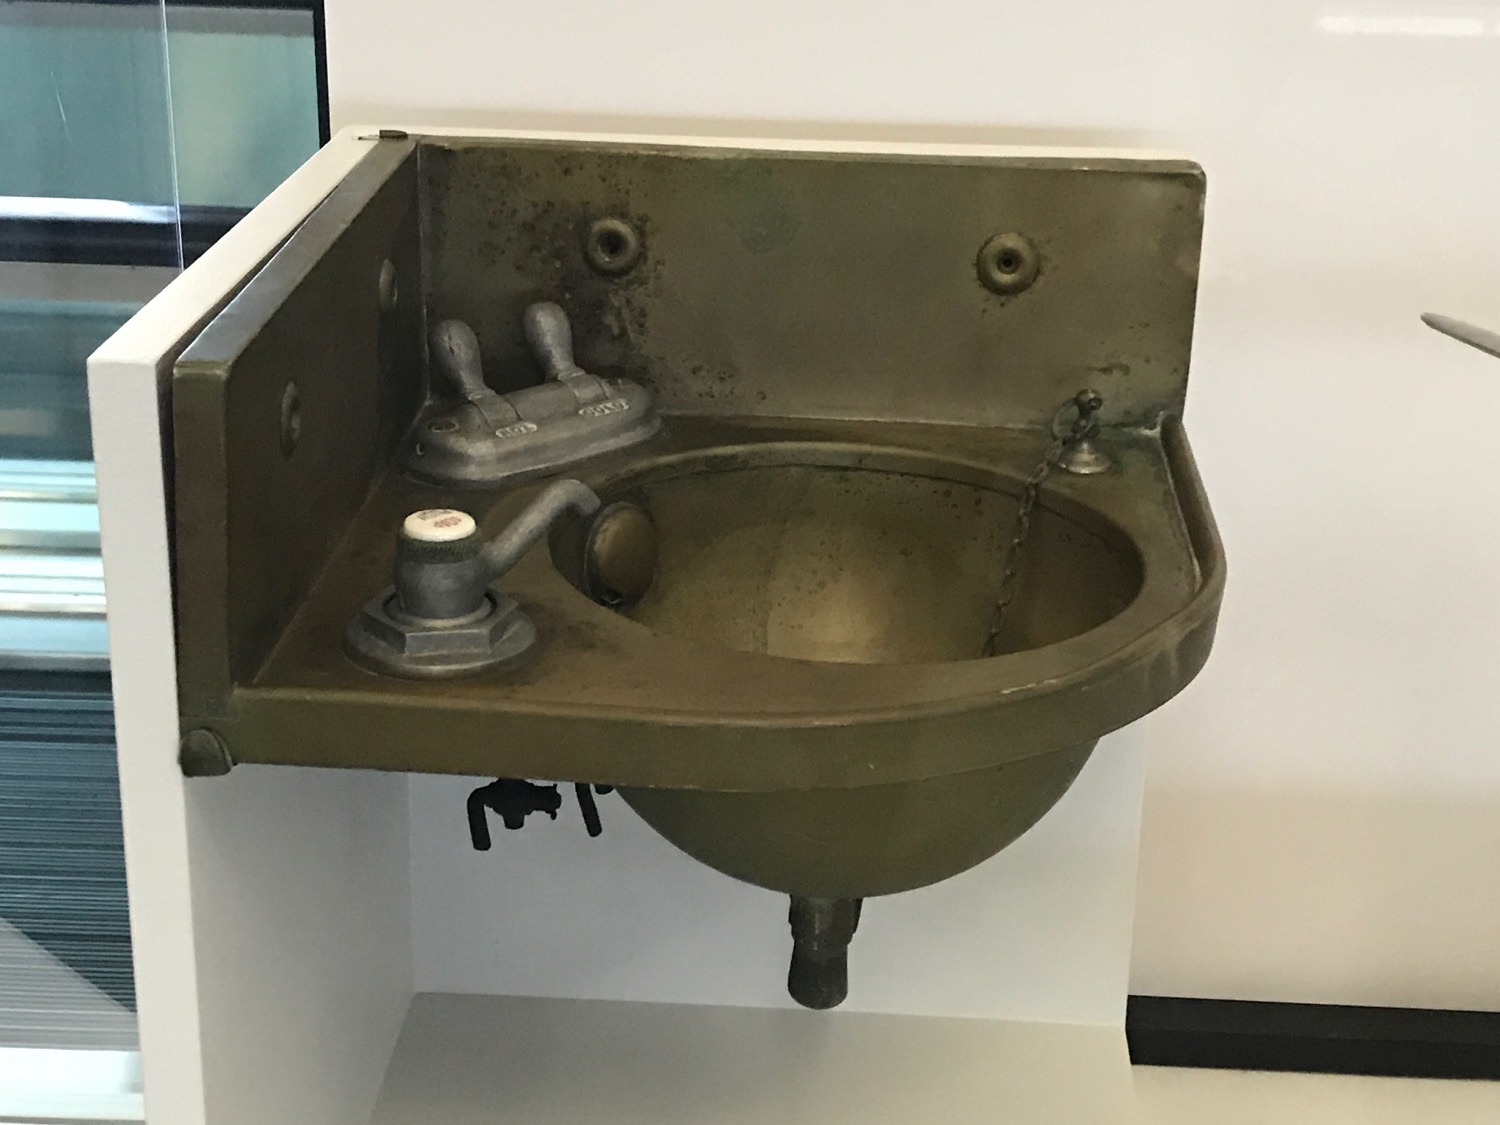 a sink with faucet and tap